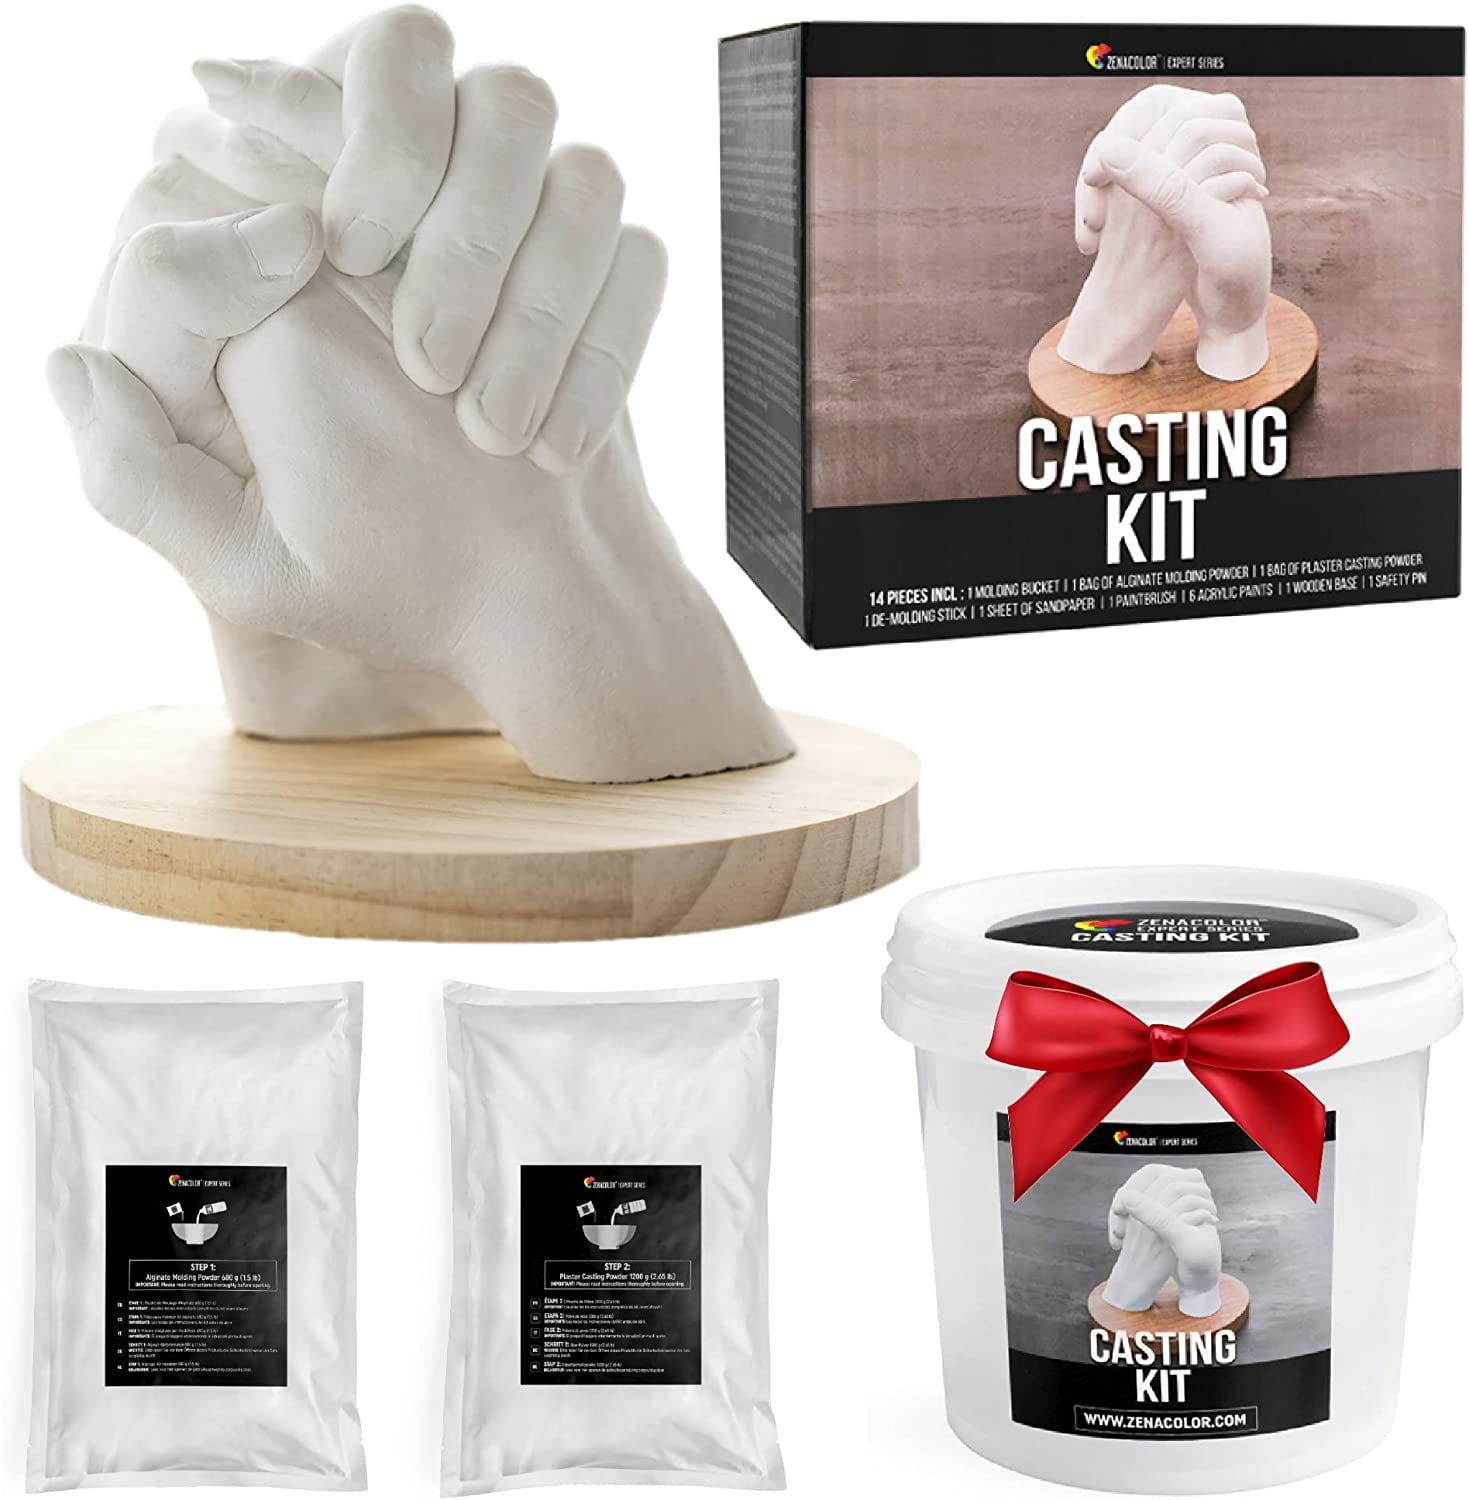  Hand Casting Kit Couples & Keepsake Hand Mold kit Couples for  Holiday Activities, Additional Molding Kits Refill with Molding Powder &  Casting Stone, Cast 4 Adult Hands : אמנות, יצירה ותפירה